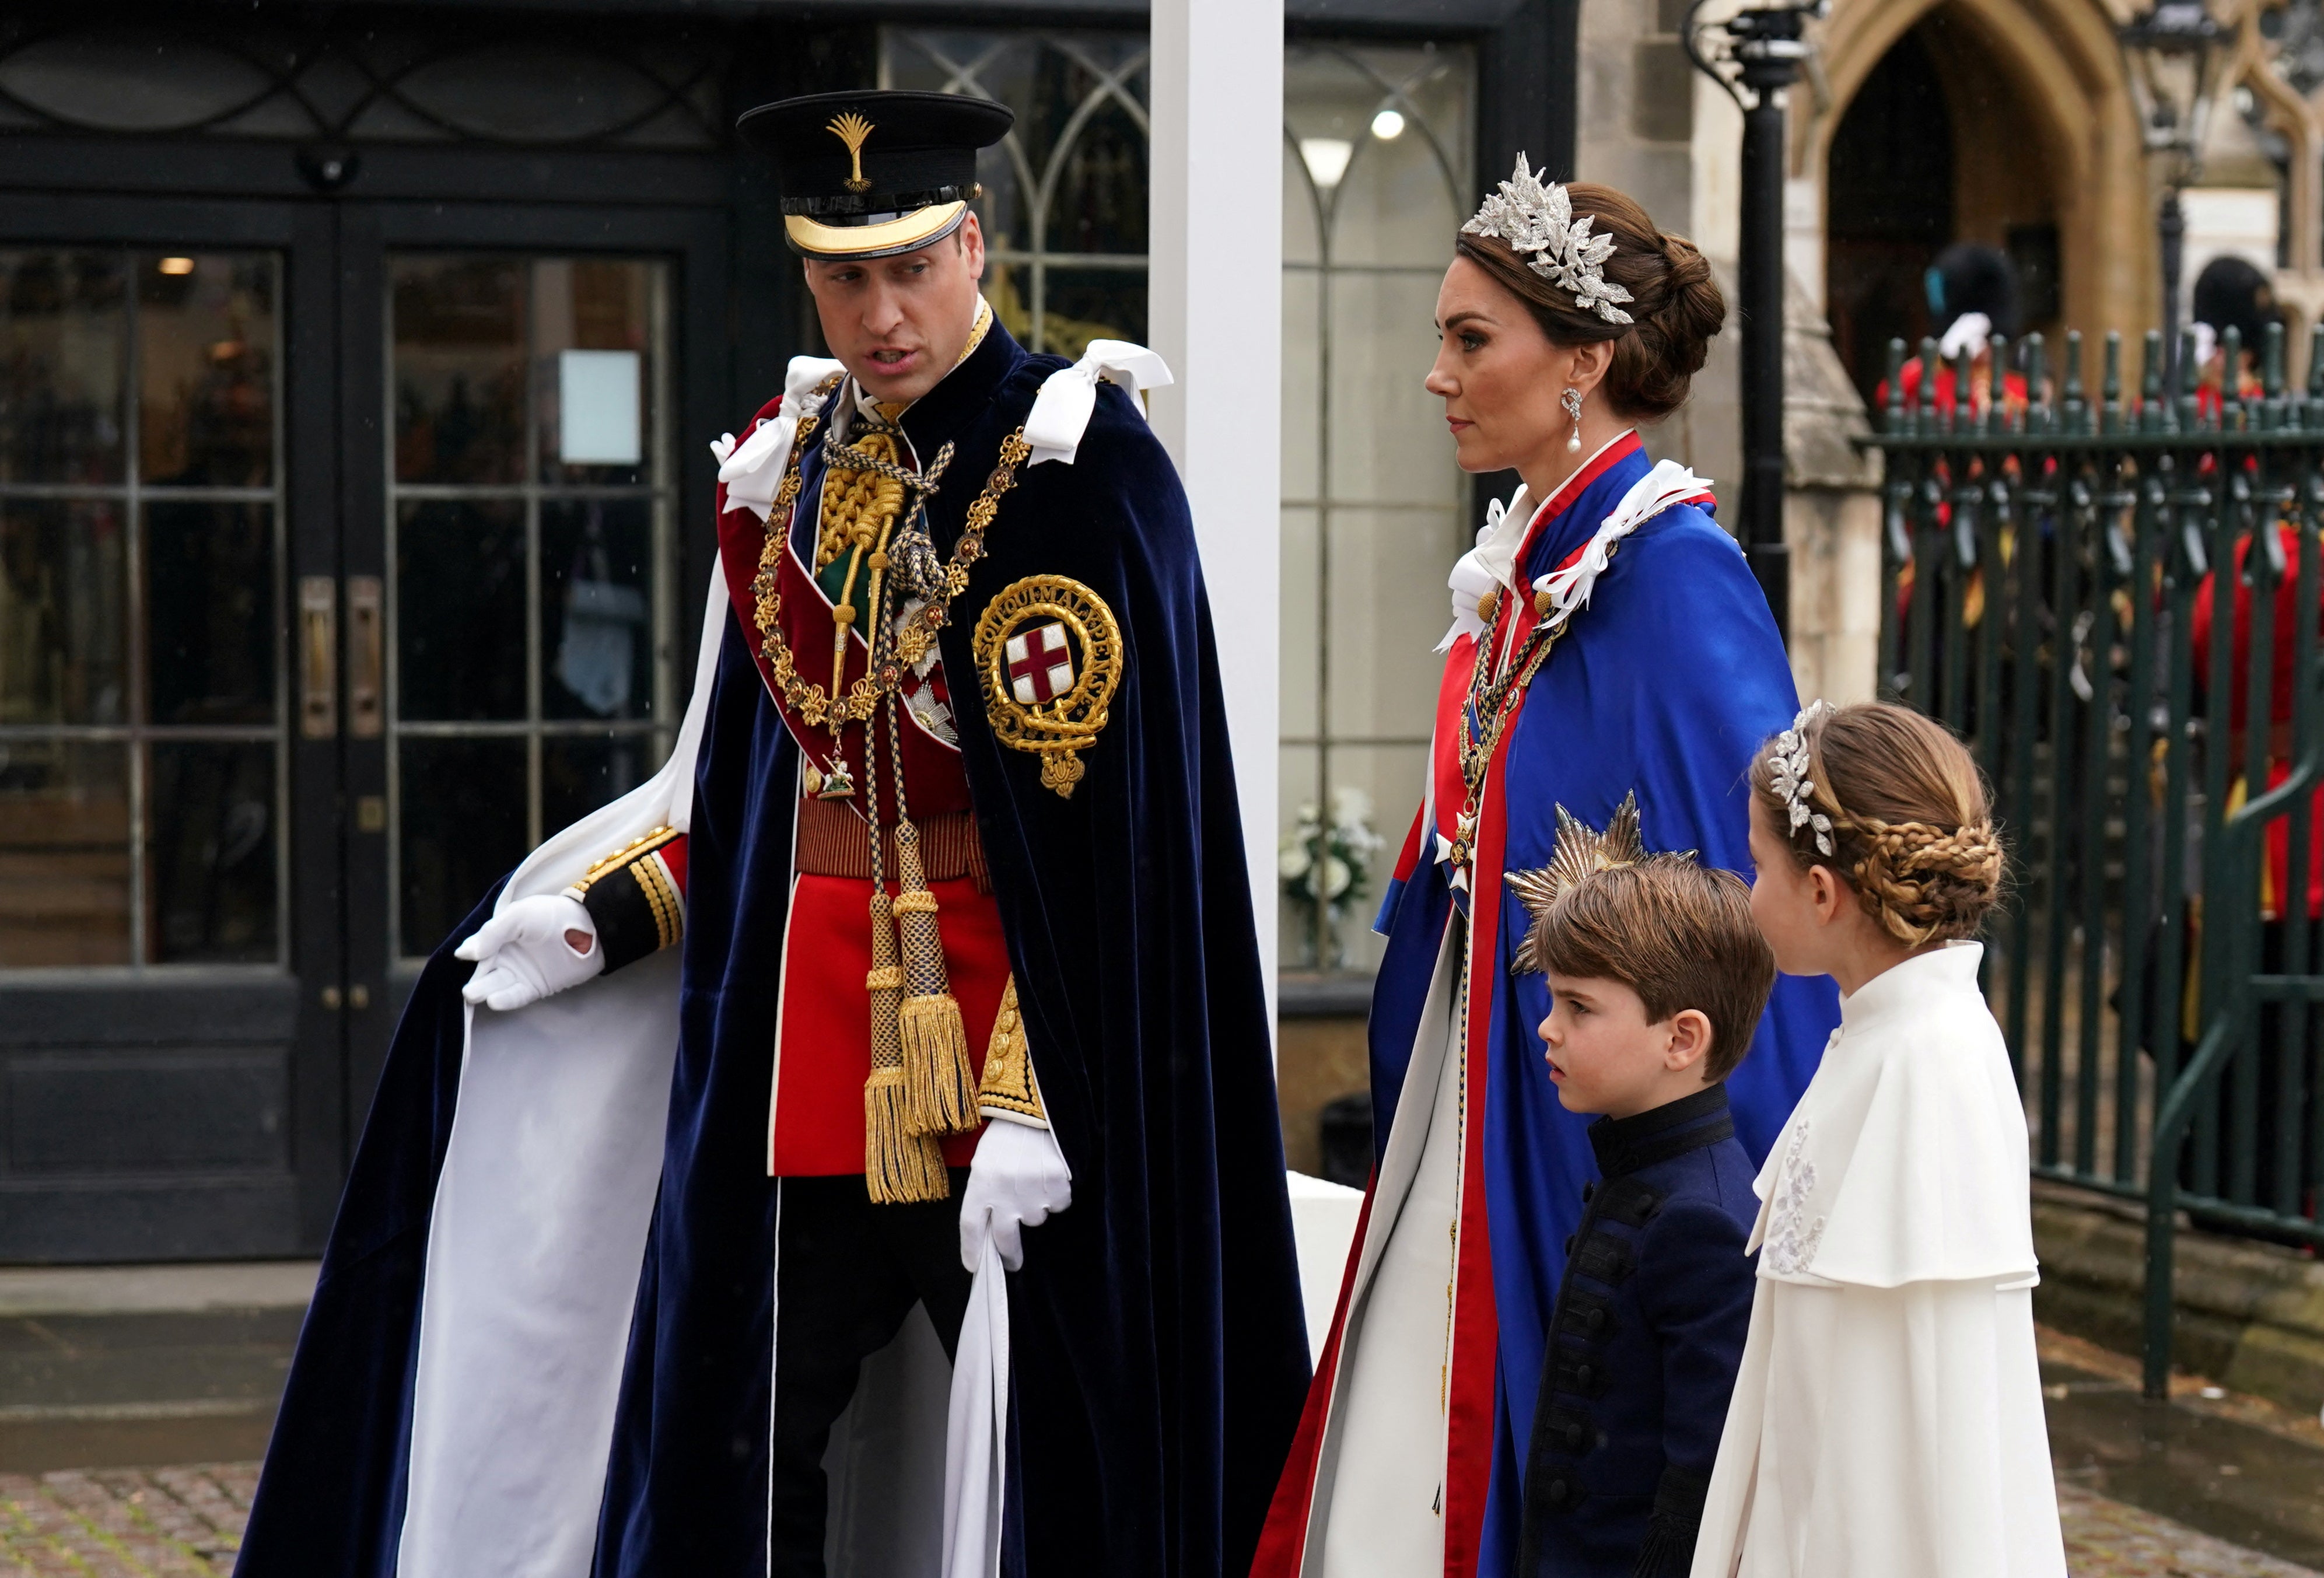 Both Kate and Charlotte wore almost identical Alexander McQueen outfits